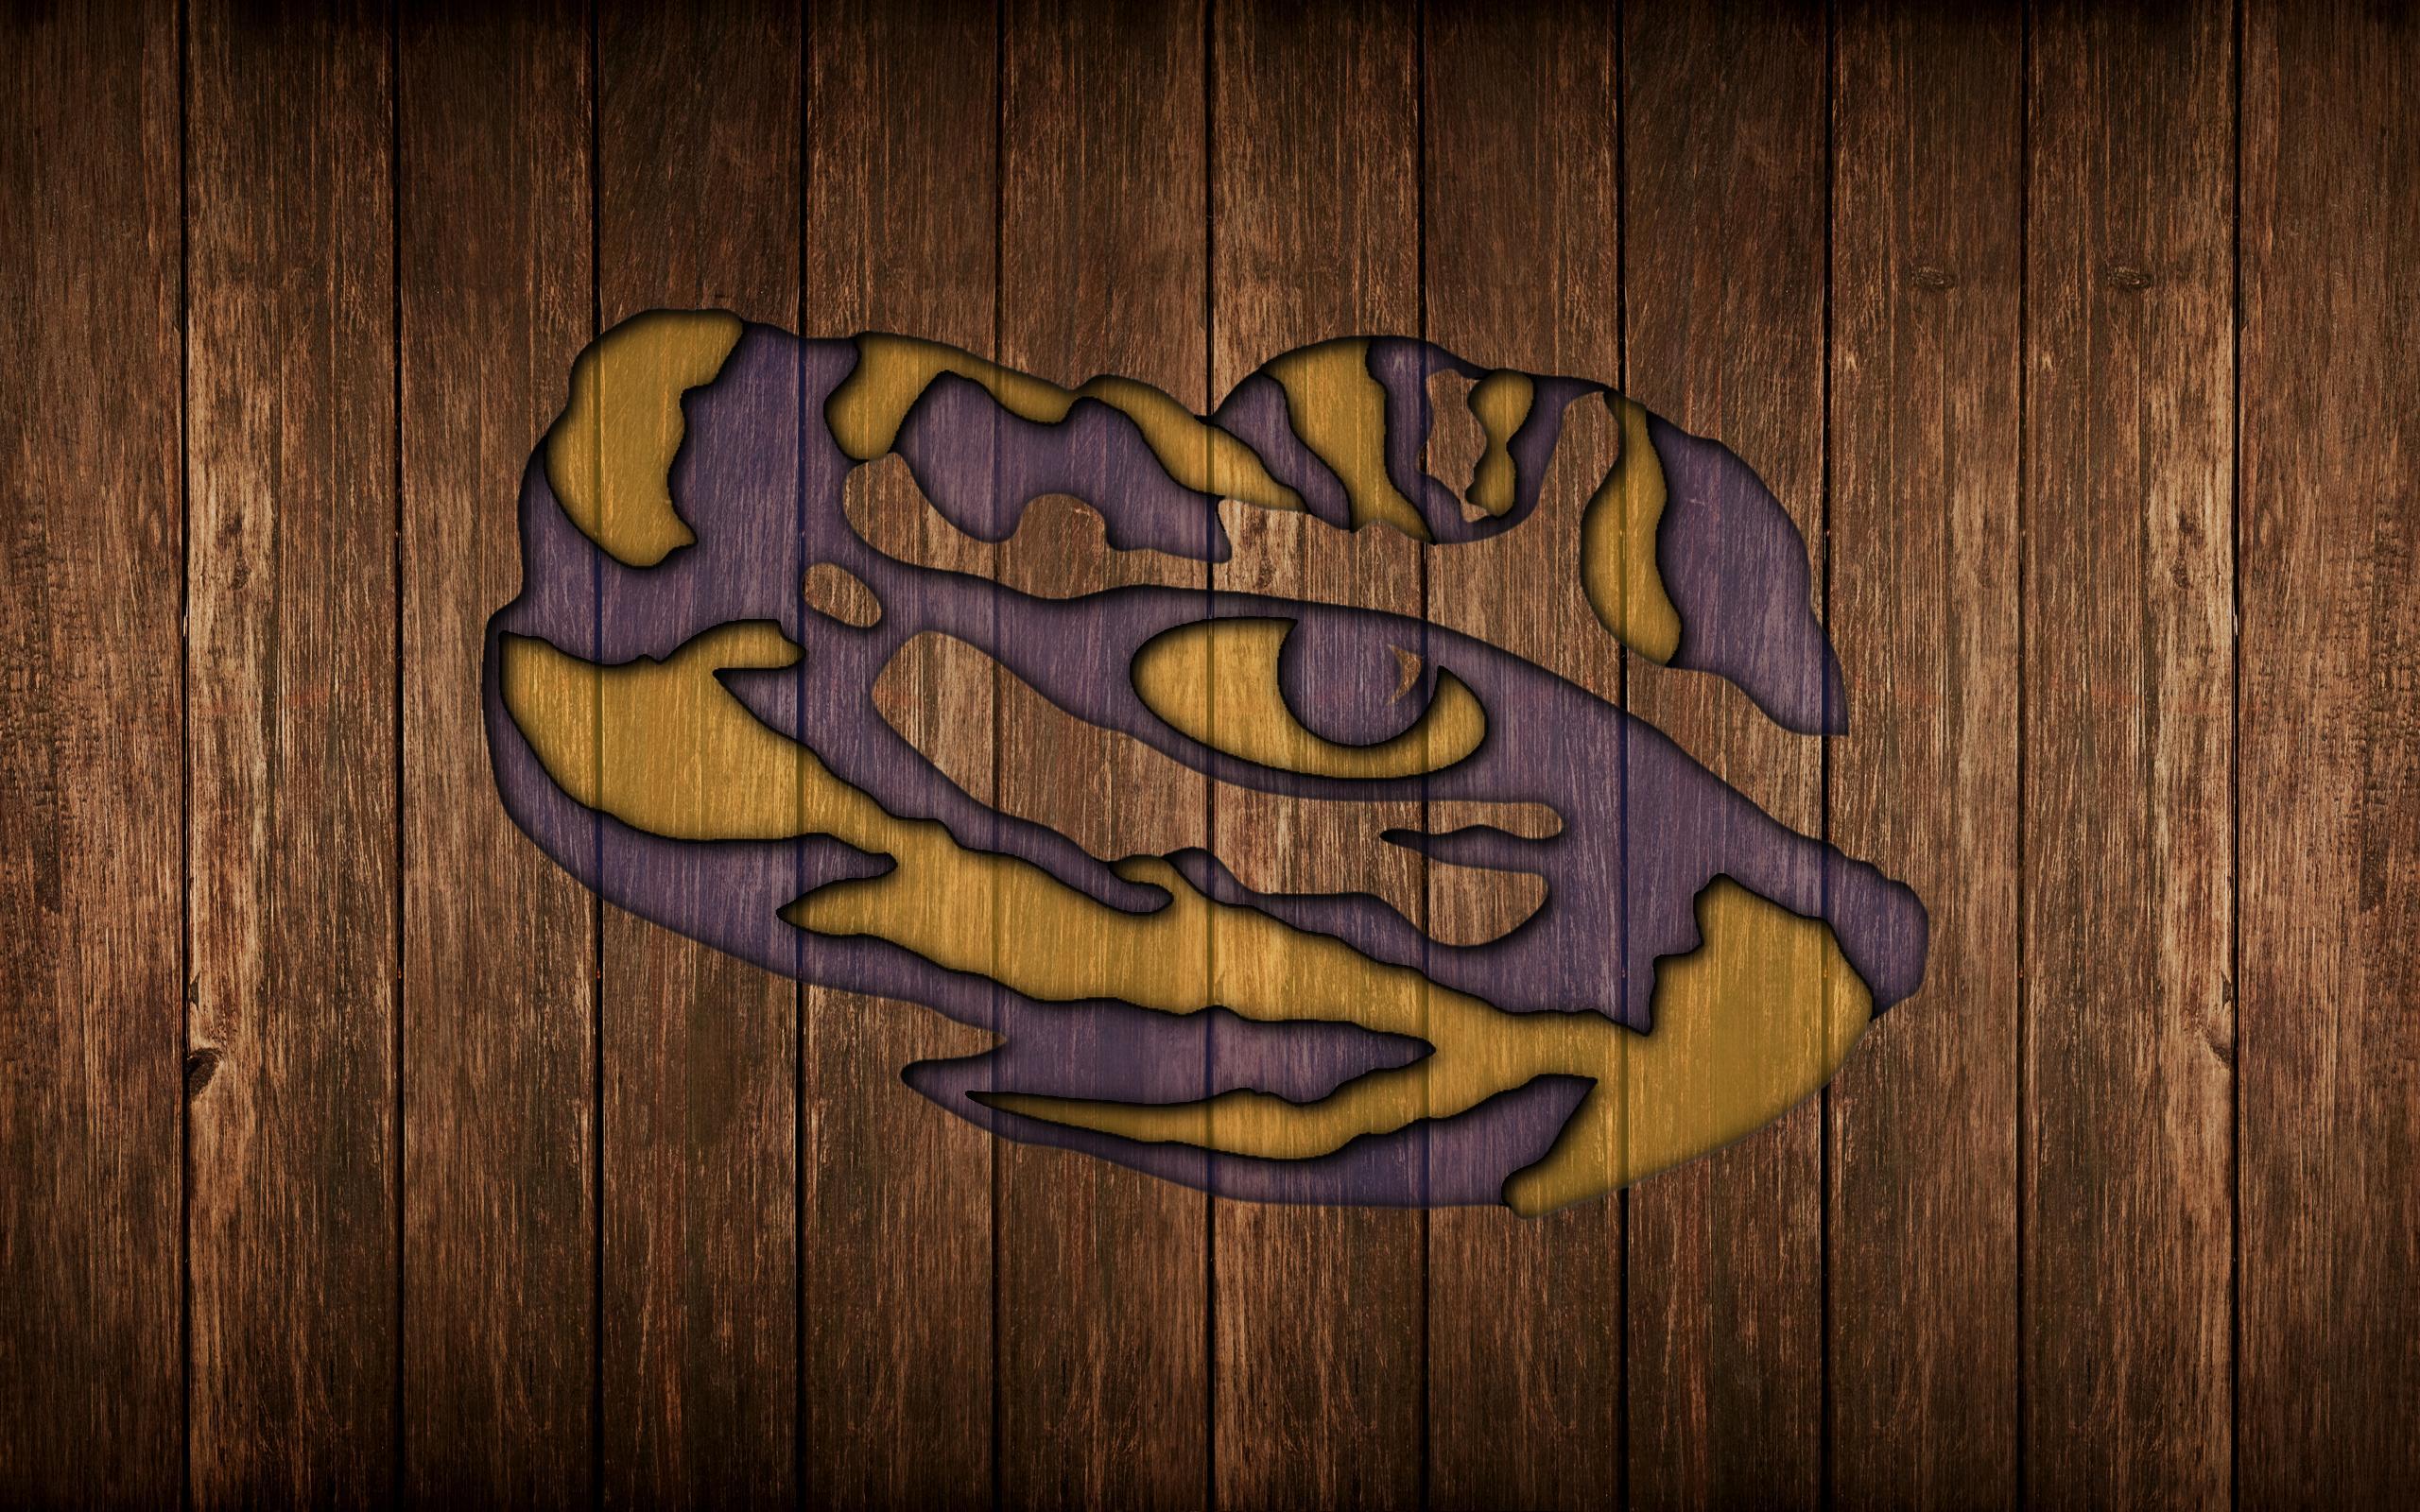 Some new LSU wallpapers I have been working on